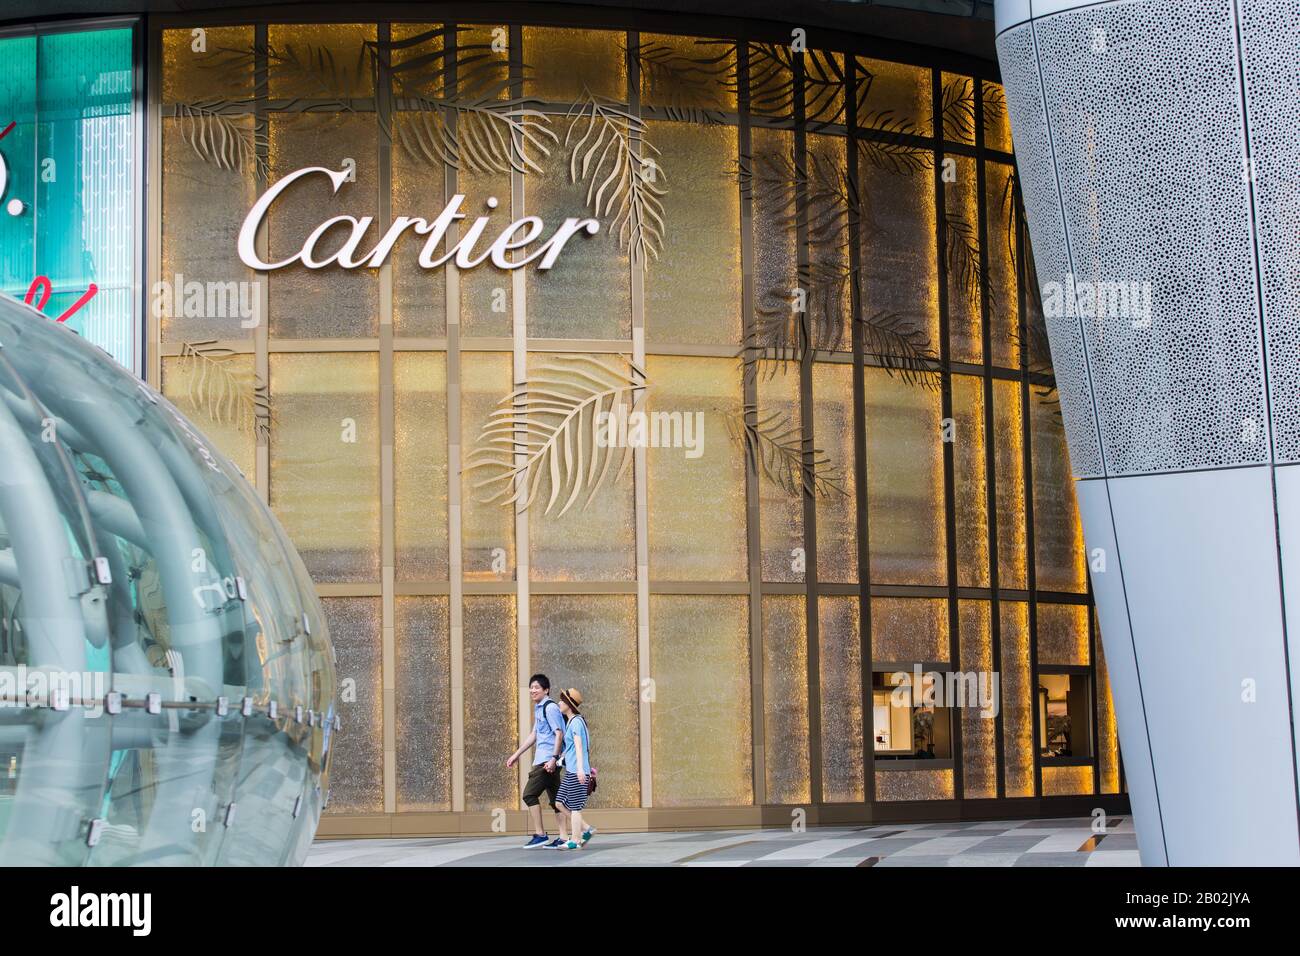 cartier orchard